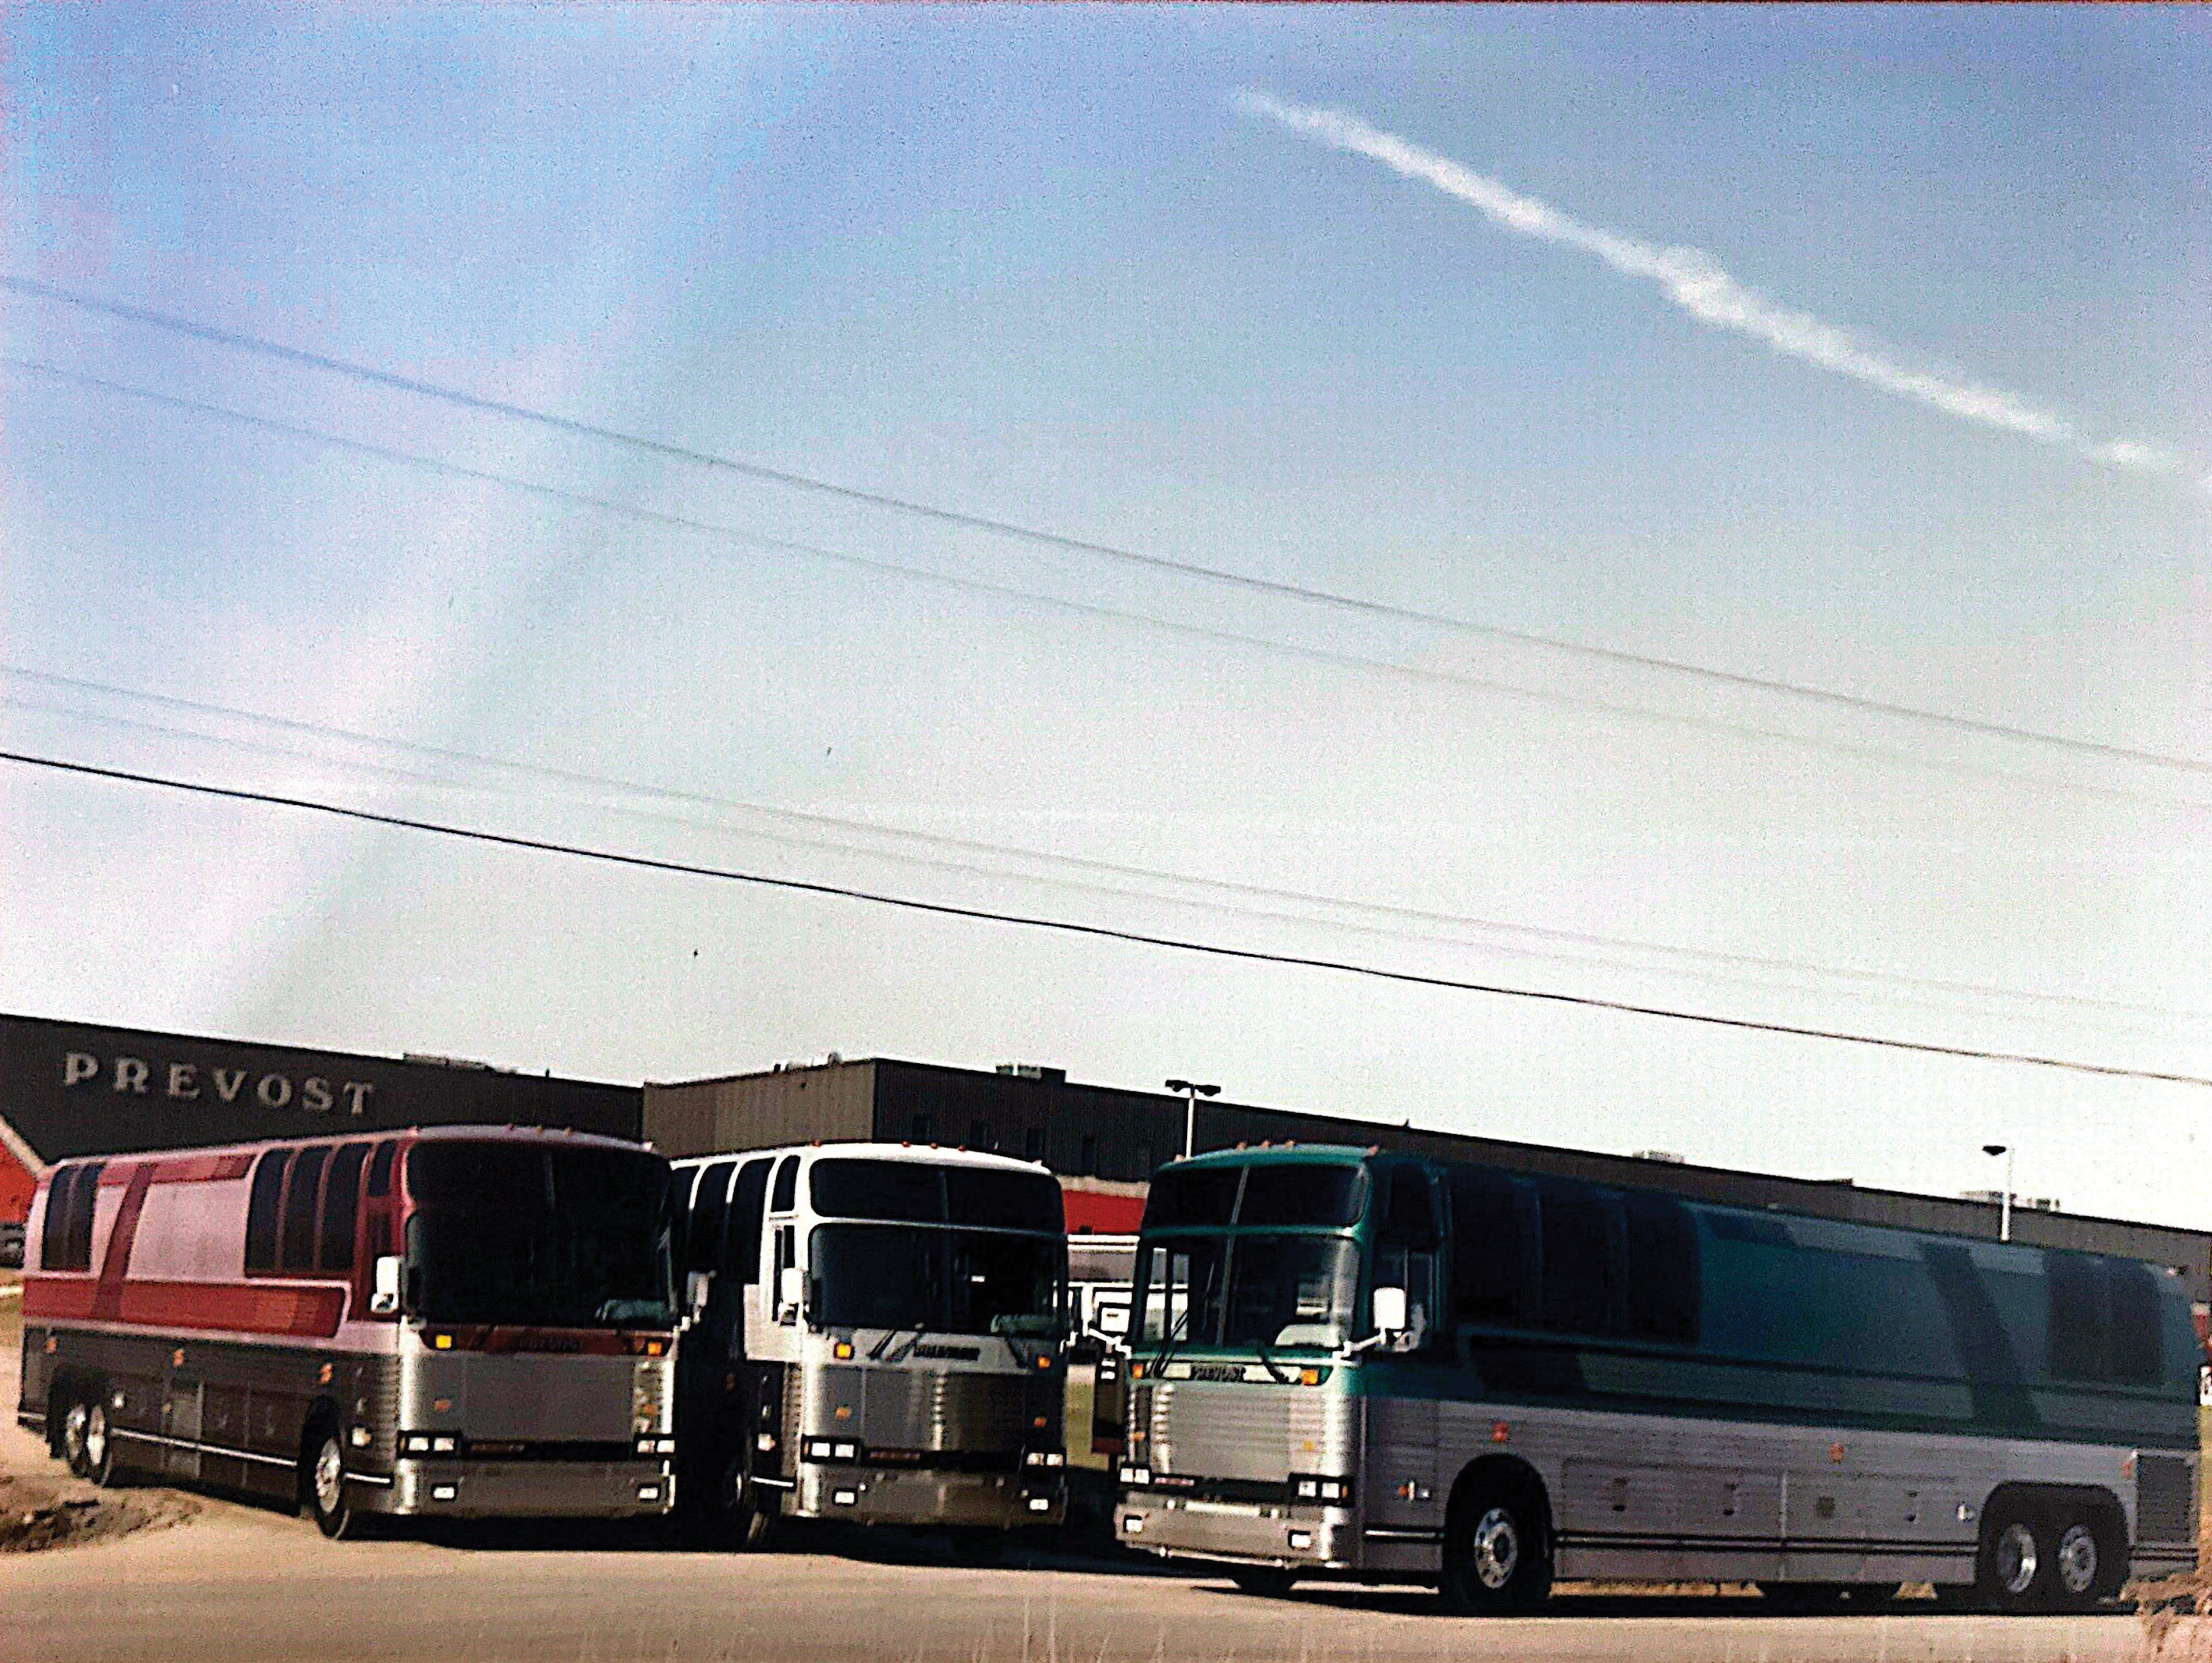 Prevost introduces the long wheelbase XL-45 for traveling entertainers and outsells all competitive models.